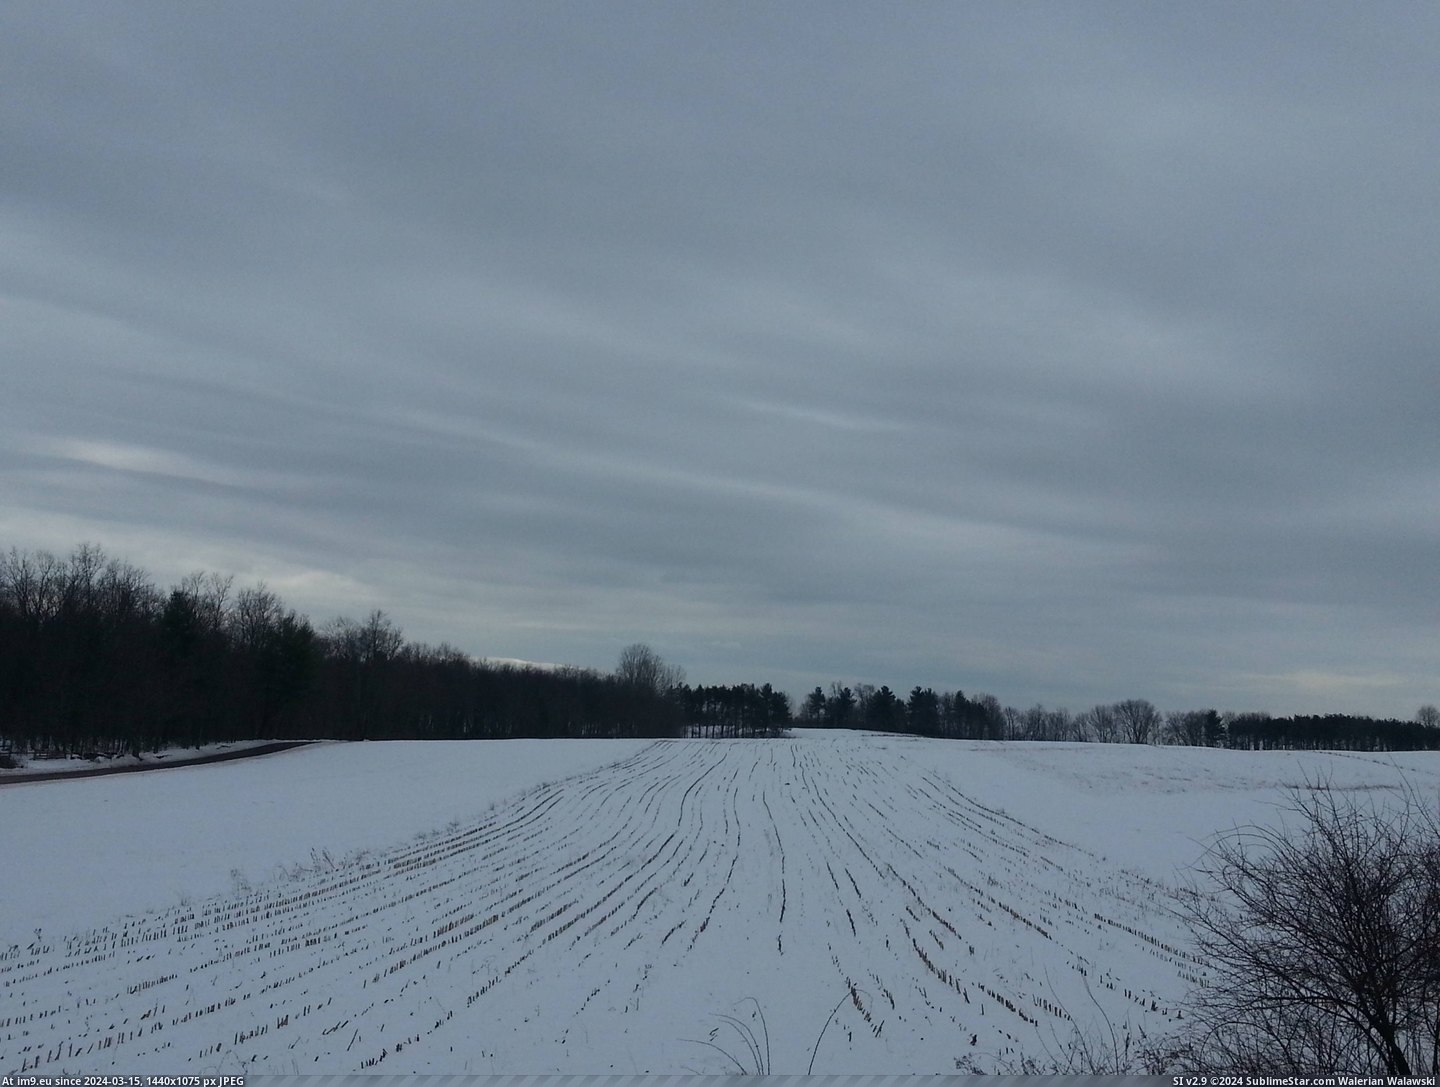 #Year #Not #Sub #Recess #Cornfield #Shickshinny #Pennsylvania #Overly #Dramatic [Earthporn] A cornfield in Shickshinny, Pennsylvania, taking a recess until next year. Not overly dramatic, there is still a sub Pic. (Изображение из альбом My r/EARTHPORN favs))